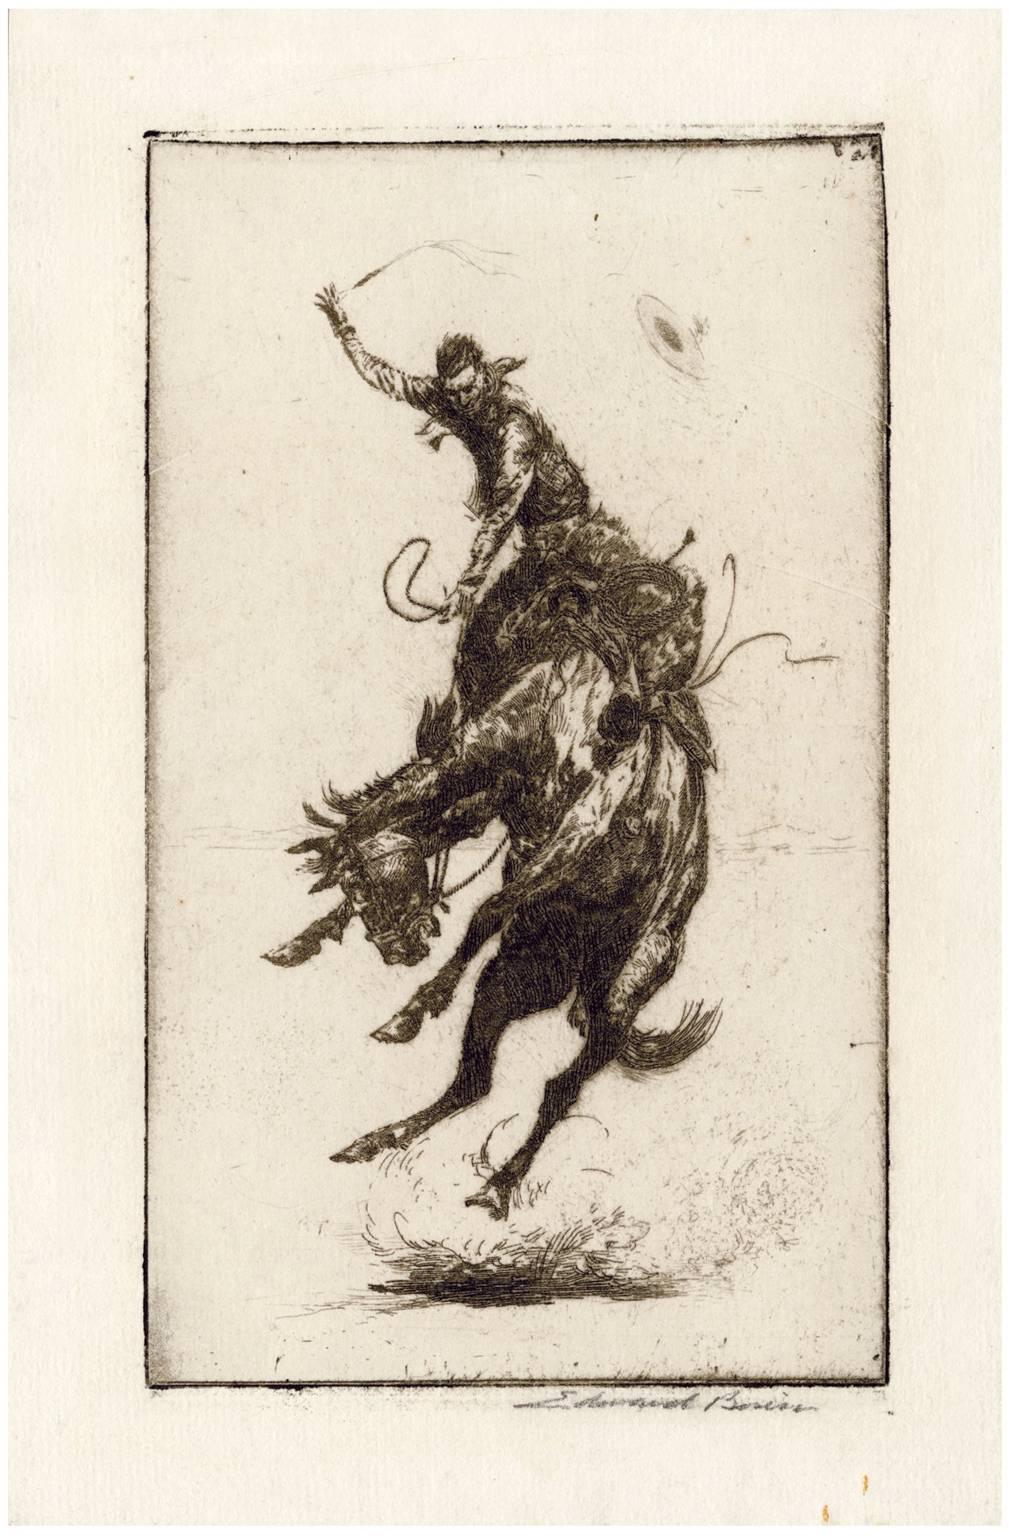 'Scratchin' High' — early American rodeo - Print by Edward Borein